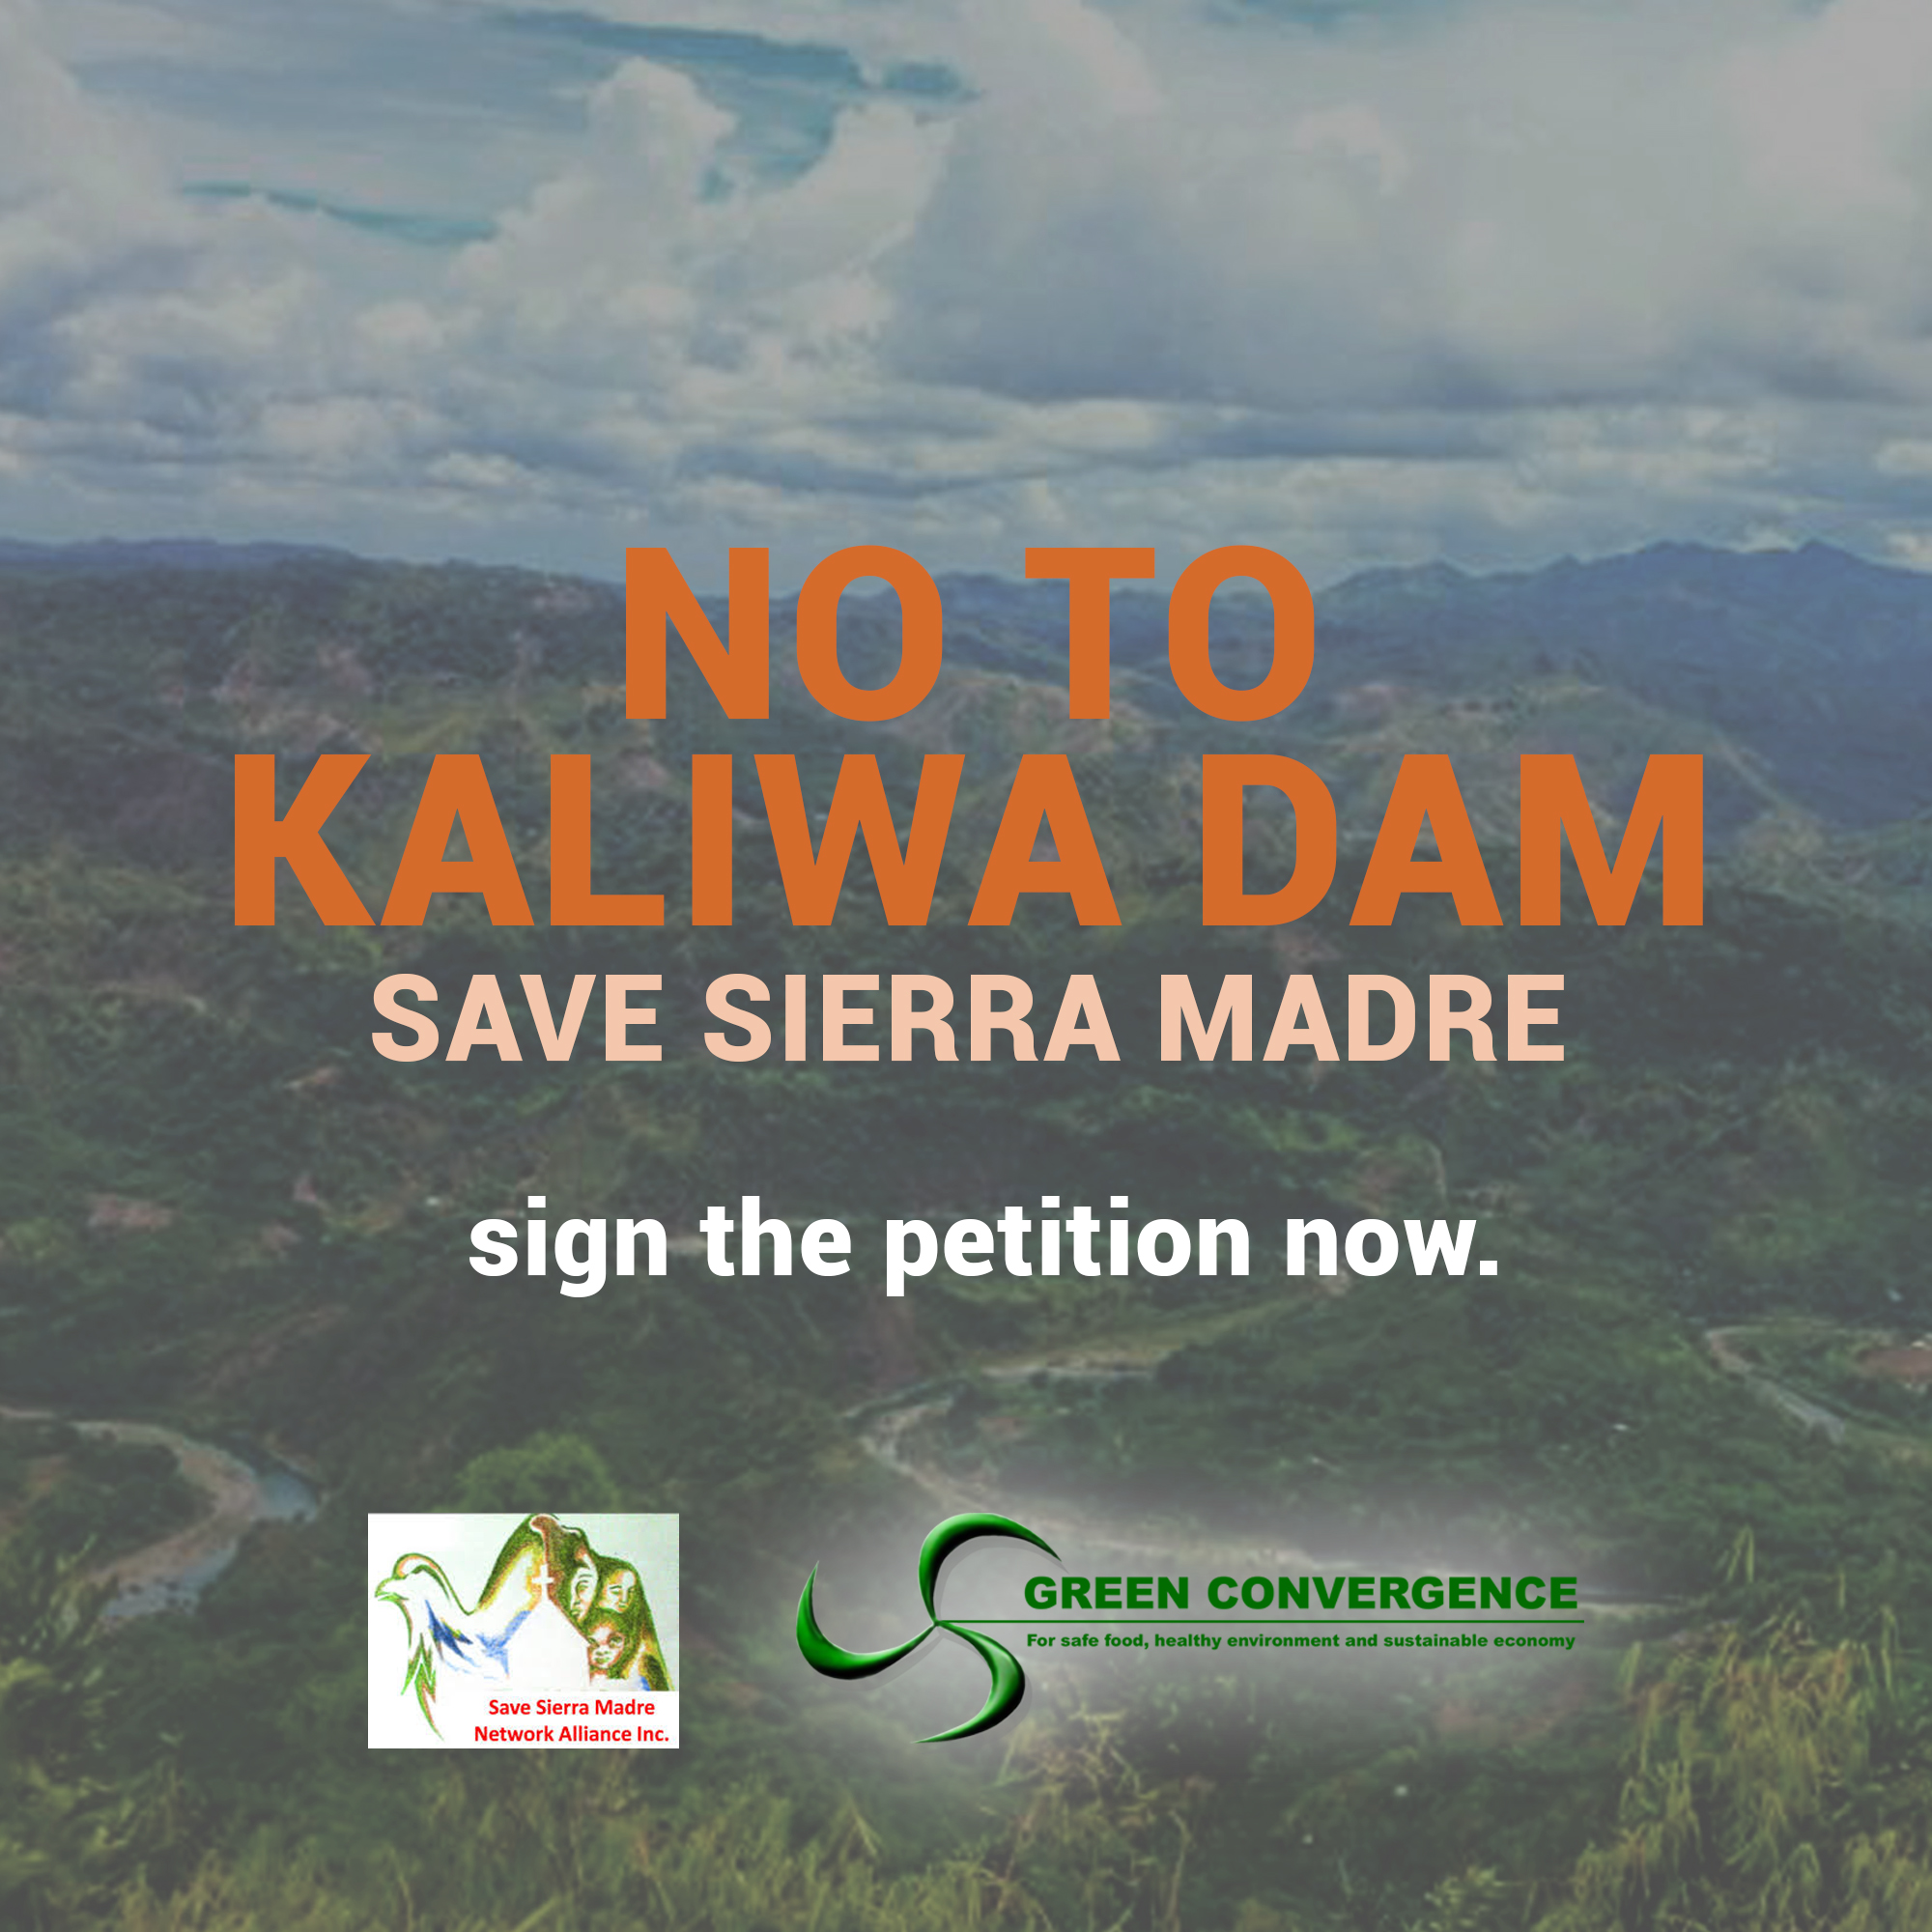 No to Kaliwa Dam! Sign the petition now!